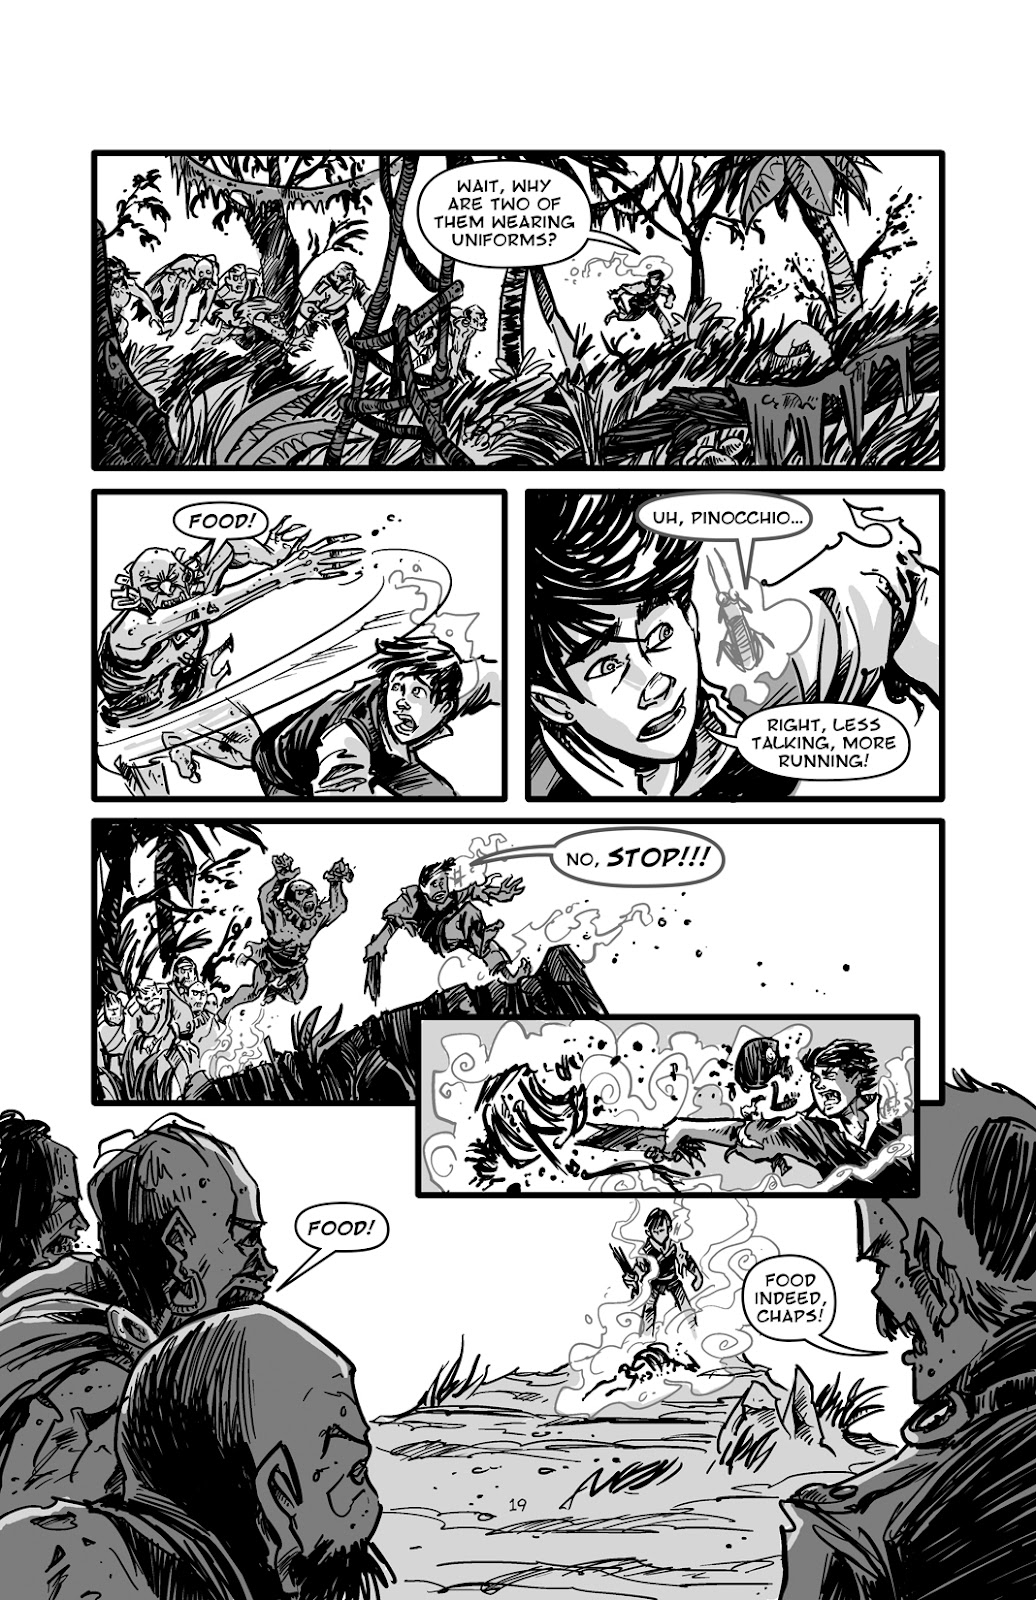 Pinocchio: Vampire Slayer - Of Wood and Blood issue 1 - Page 20